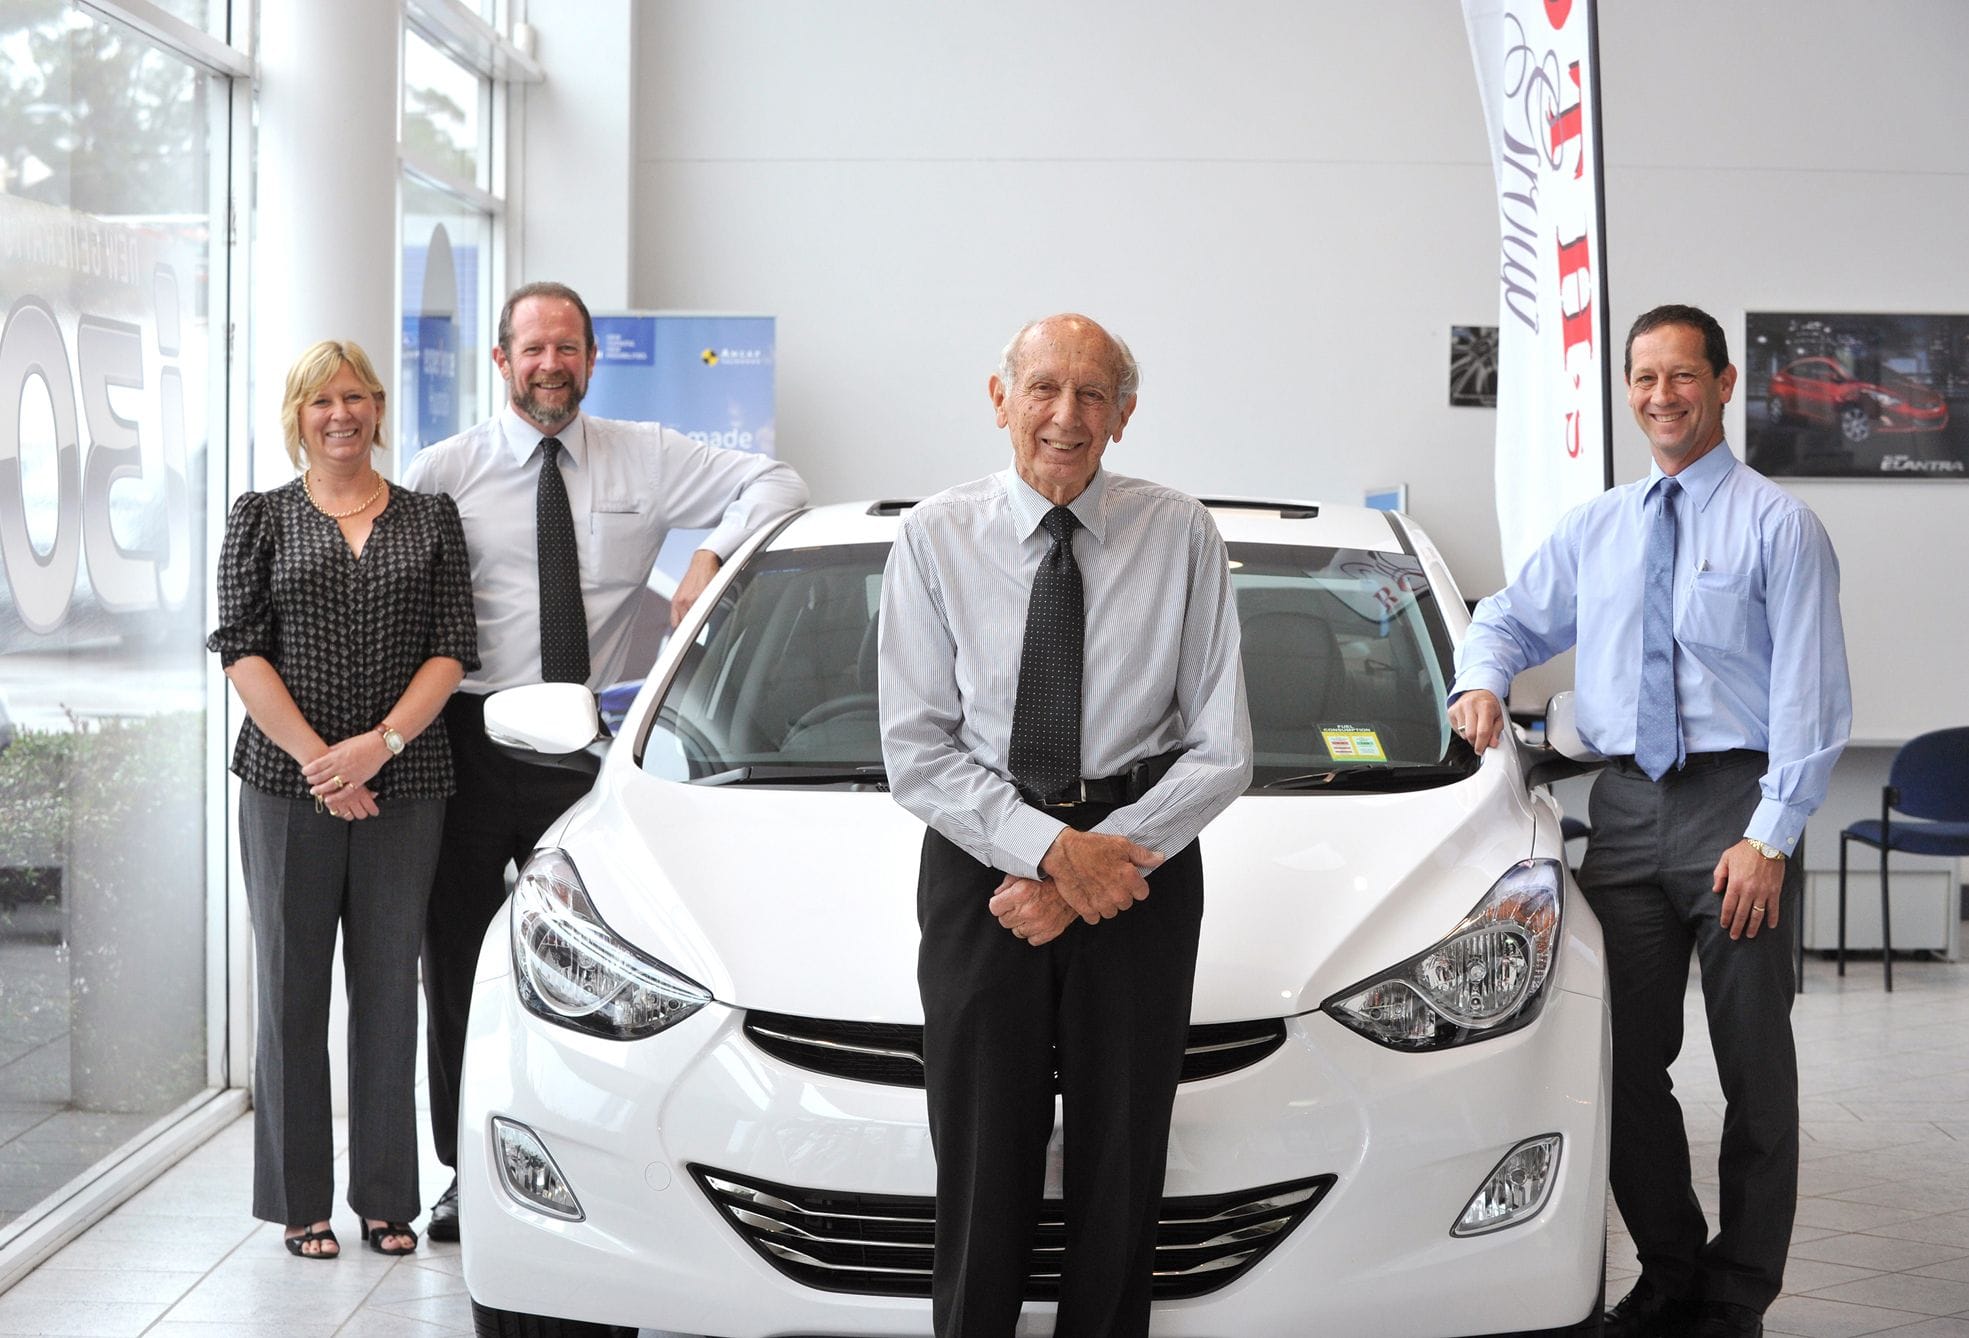 End of an era as Booth Family retires from motor industry